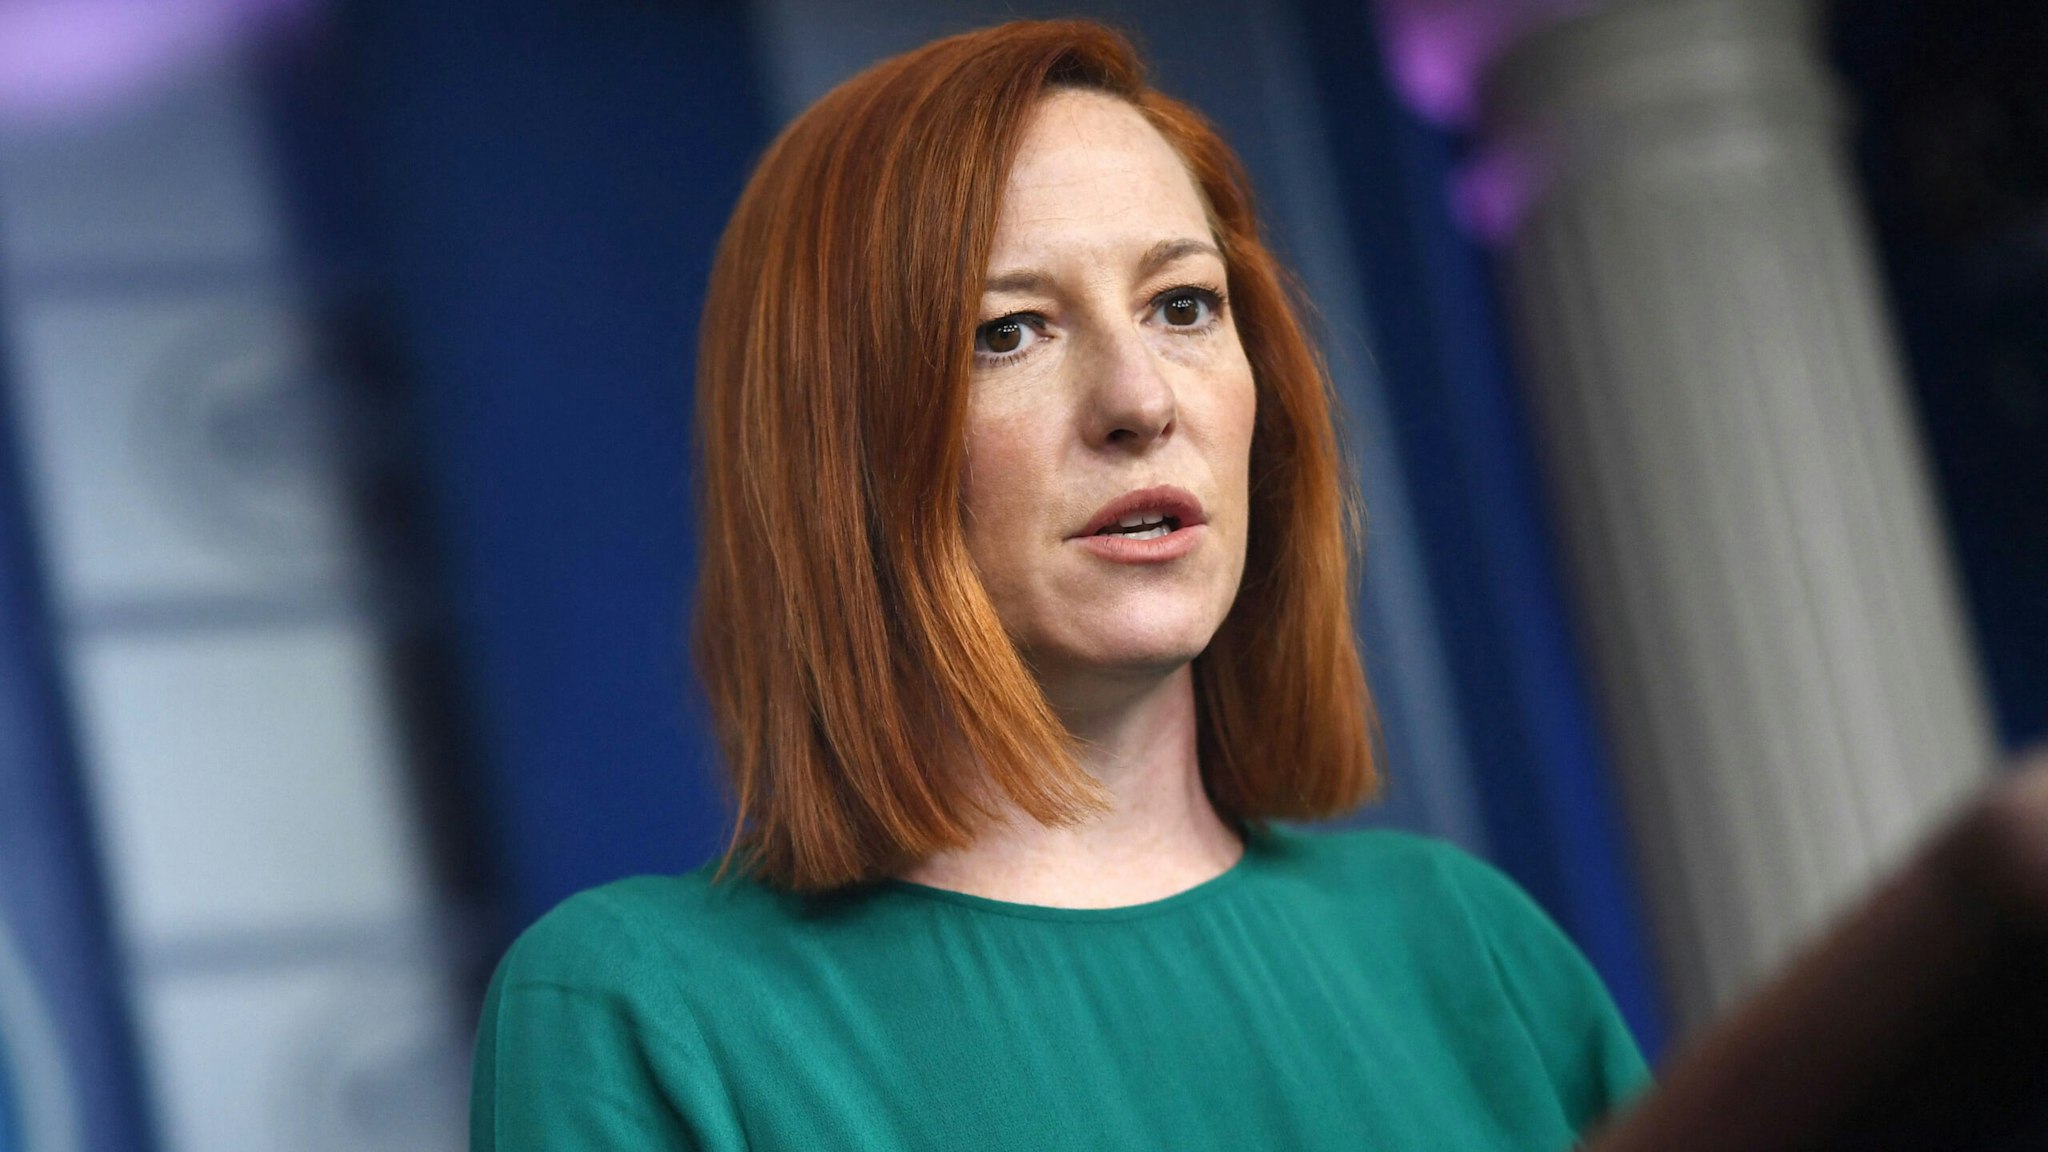 White House Press Secretary Jen Psaki speaks during the daily press briefing on March 15, 2021, in the Brady Briefing Room of the White House in Washington, DC.